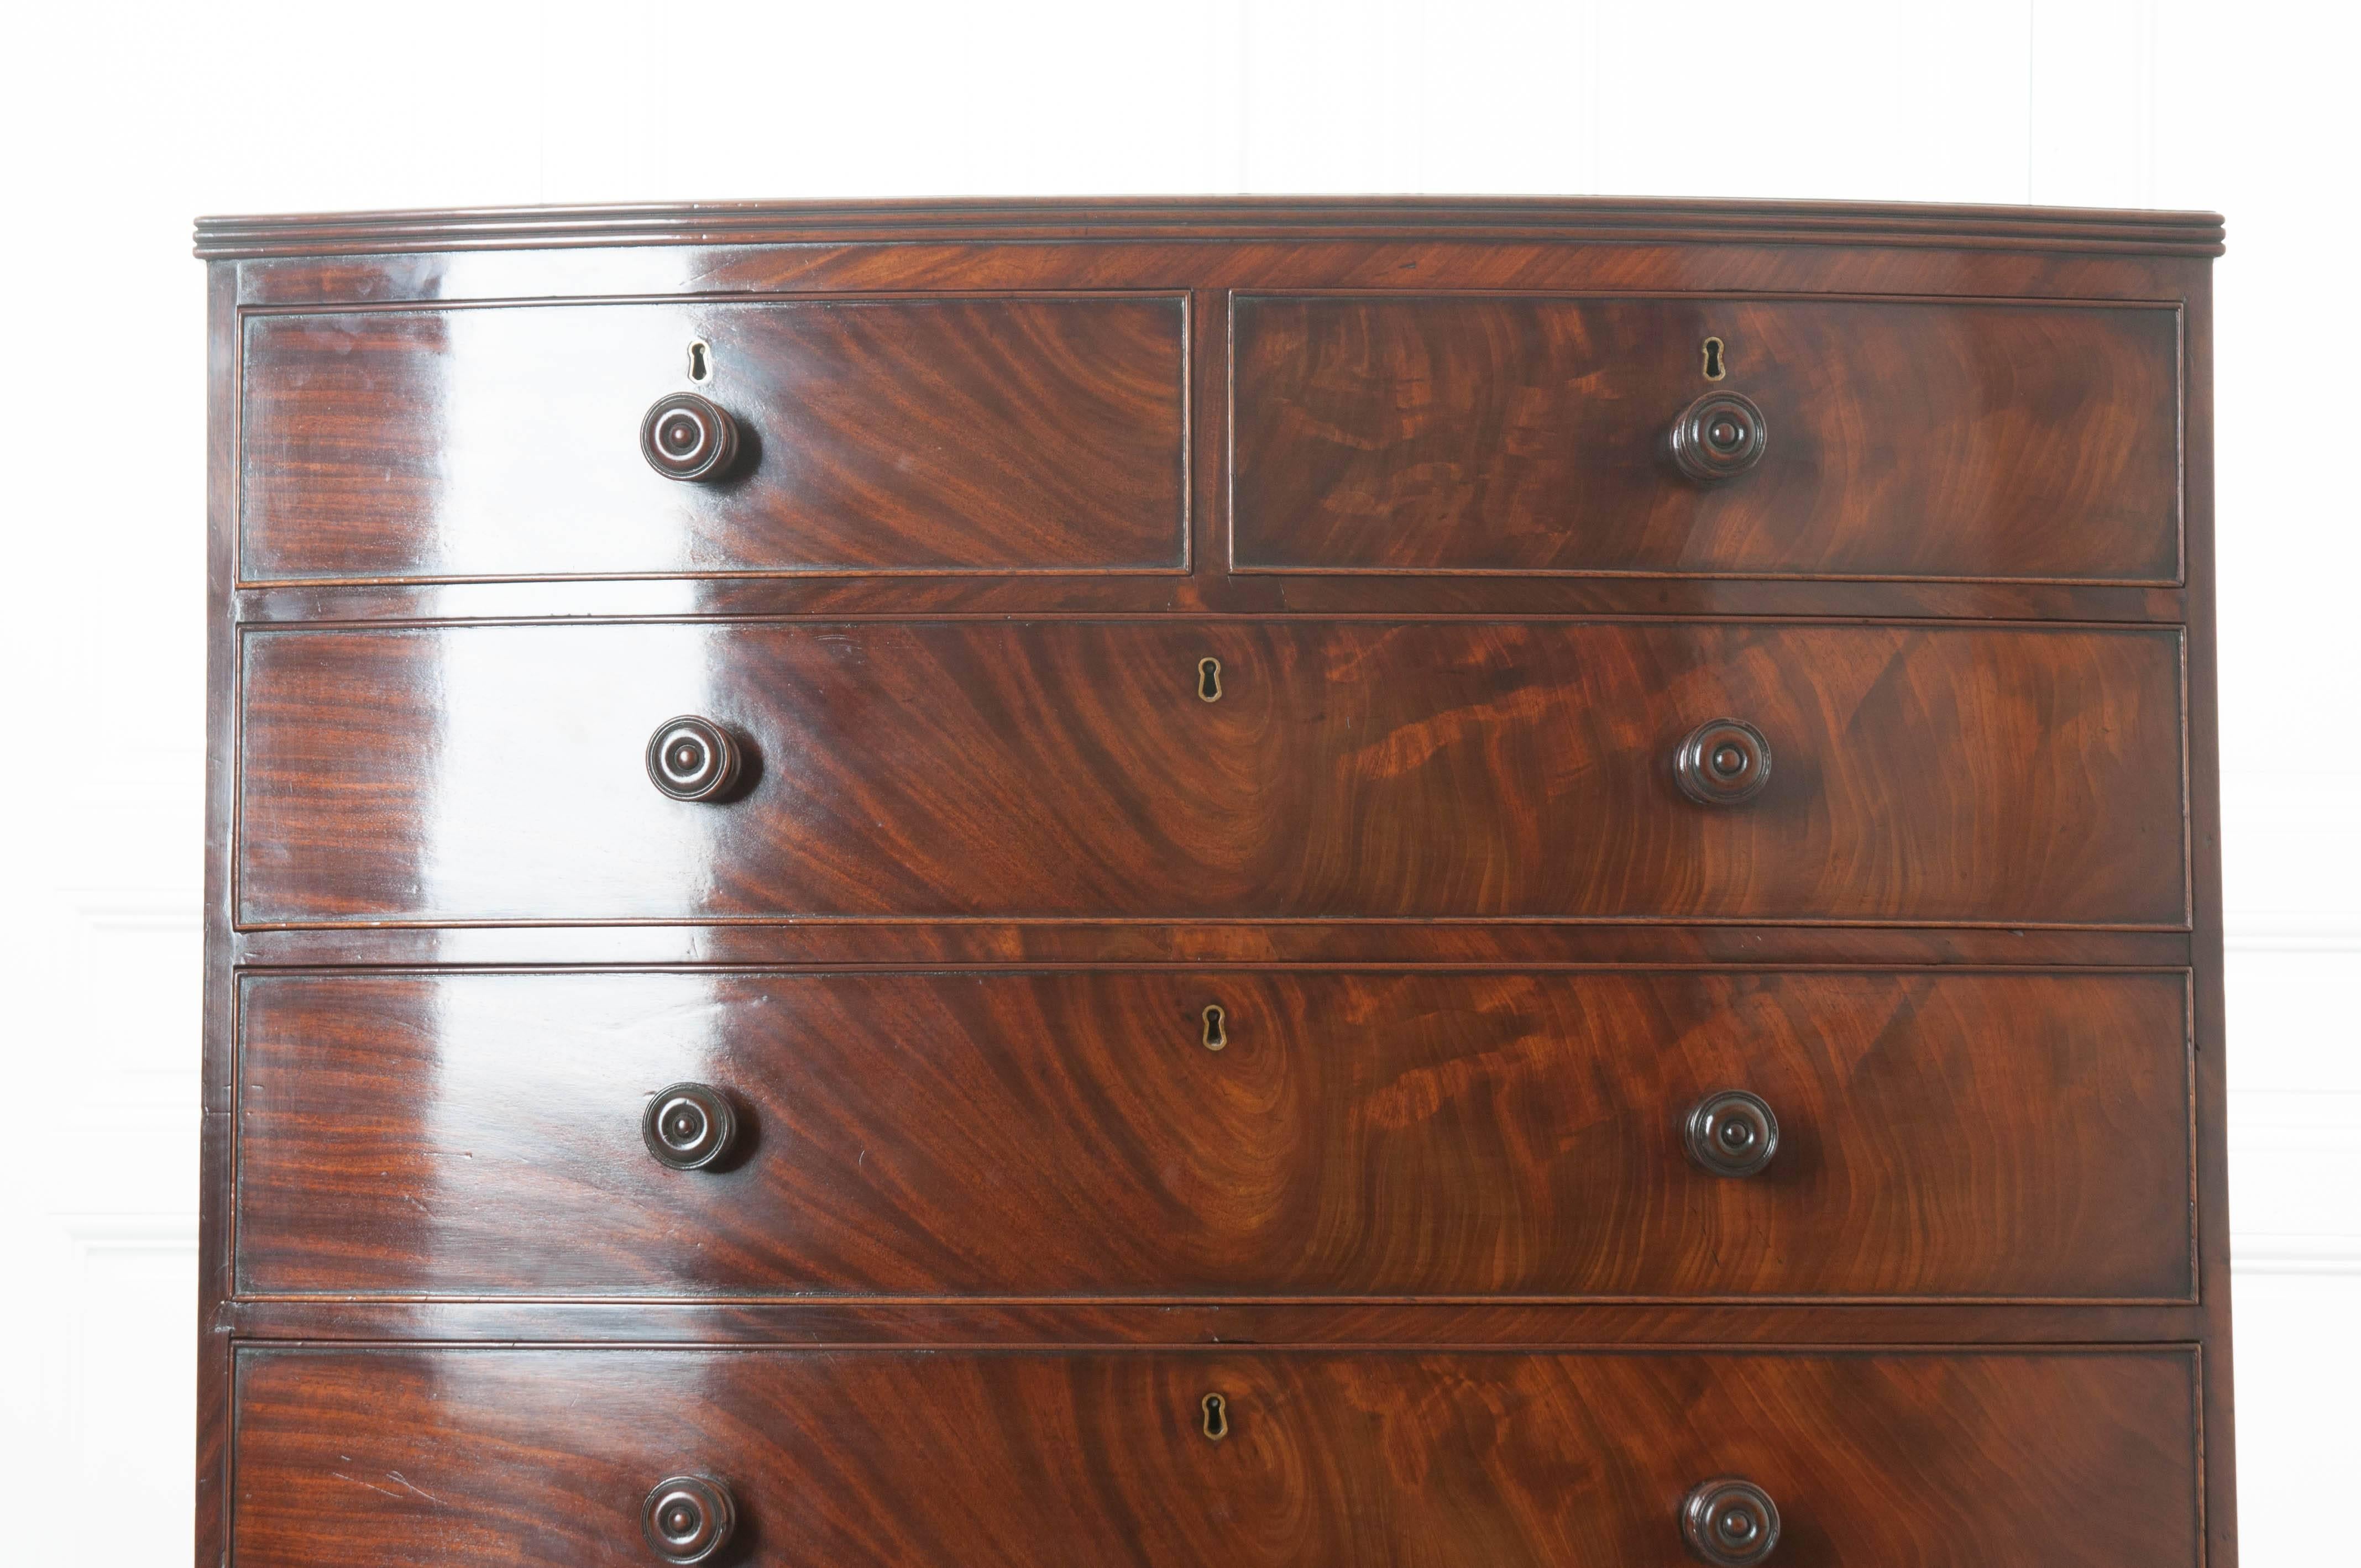 A stately, tall English mahogany chest of drawers from the 19th century. This exceptional chest is complete with six graduated drawers, all furnished with turned wood knobs and inset brass escutcheons. The bowed façade is finished in stunningly